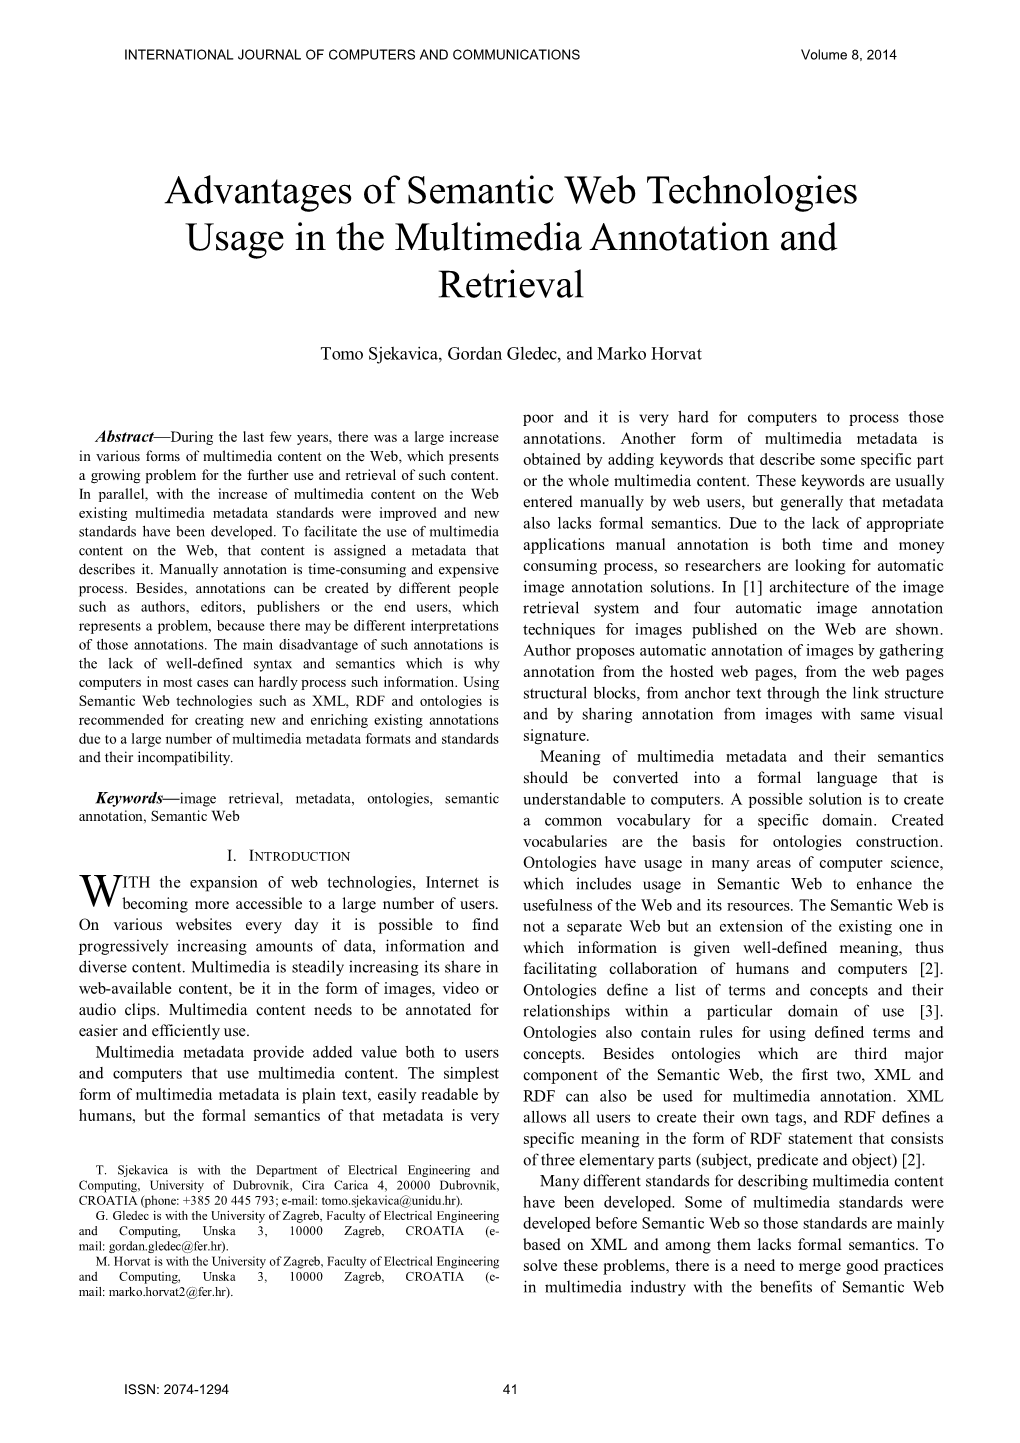 Advantages of Semantic Web Technologies Usage in the Multimedia Annotation and Retrieval